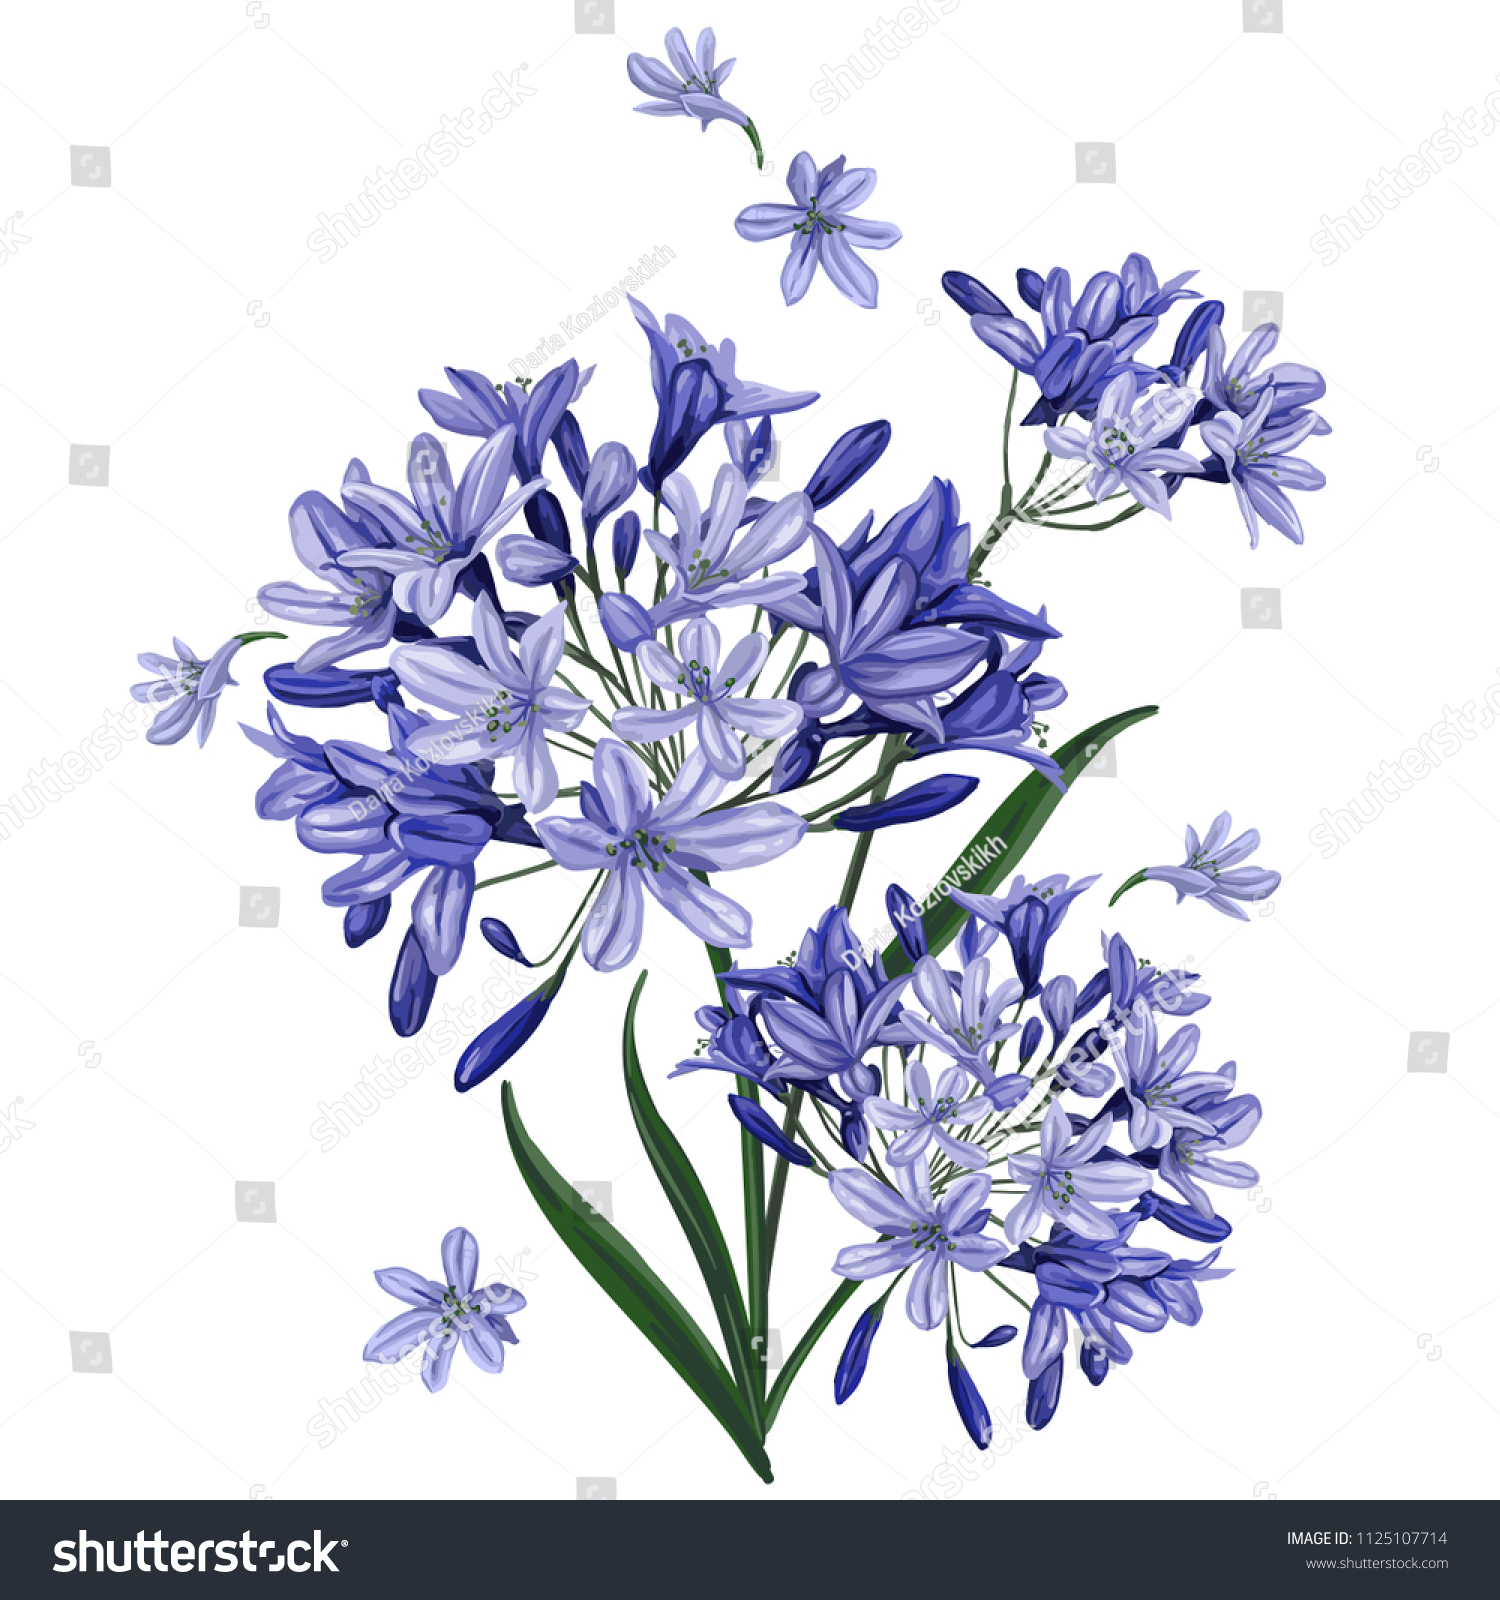 SVG of 
A bouquet of blue flowers on a white background. Isolated drawing. svg